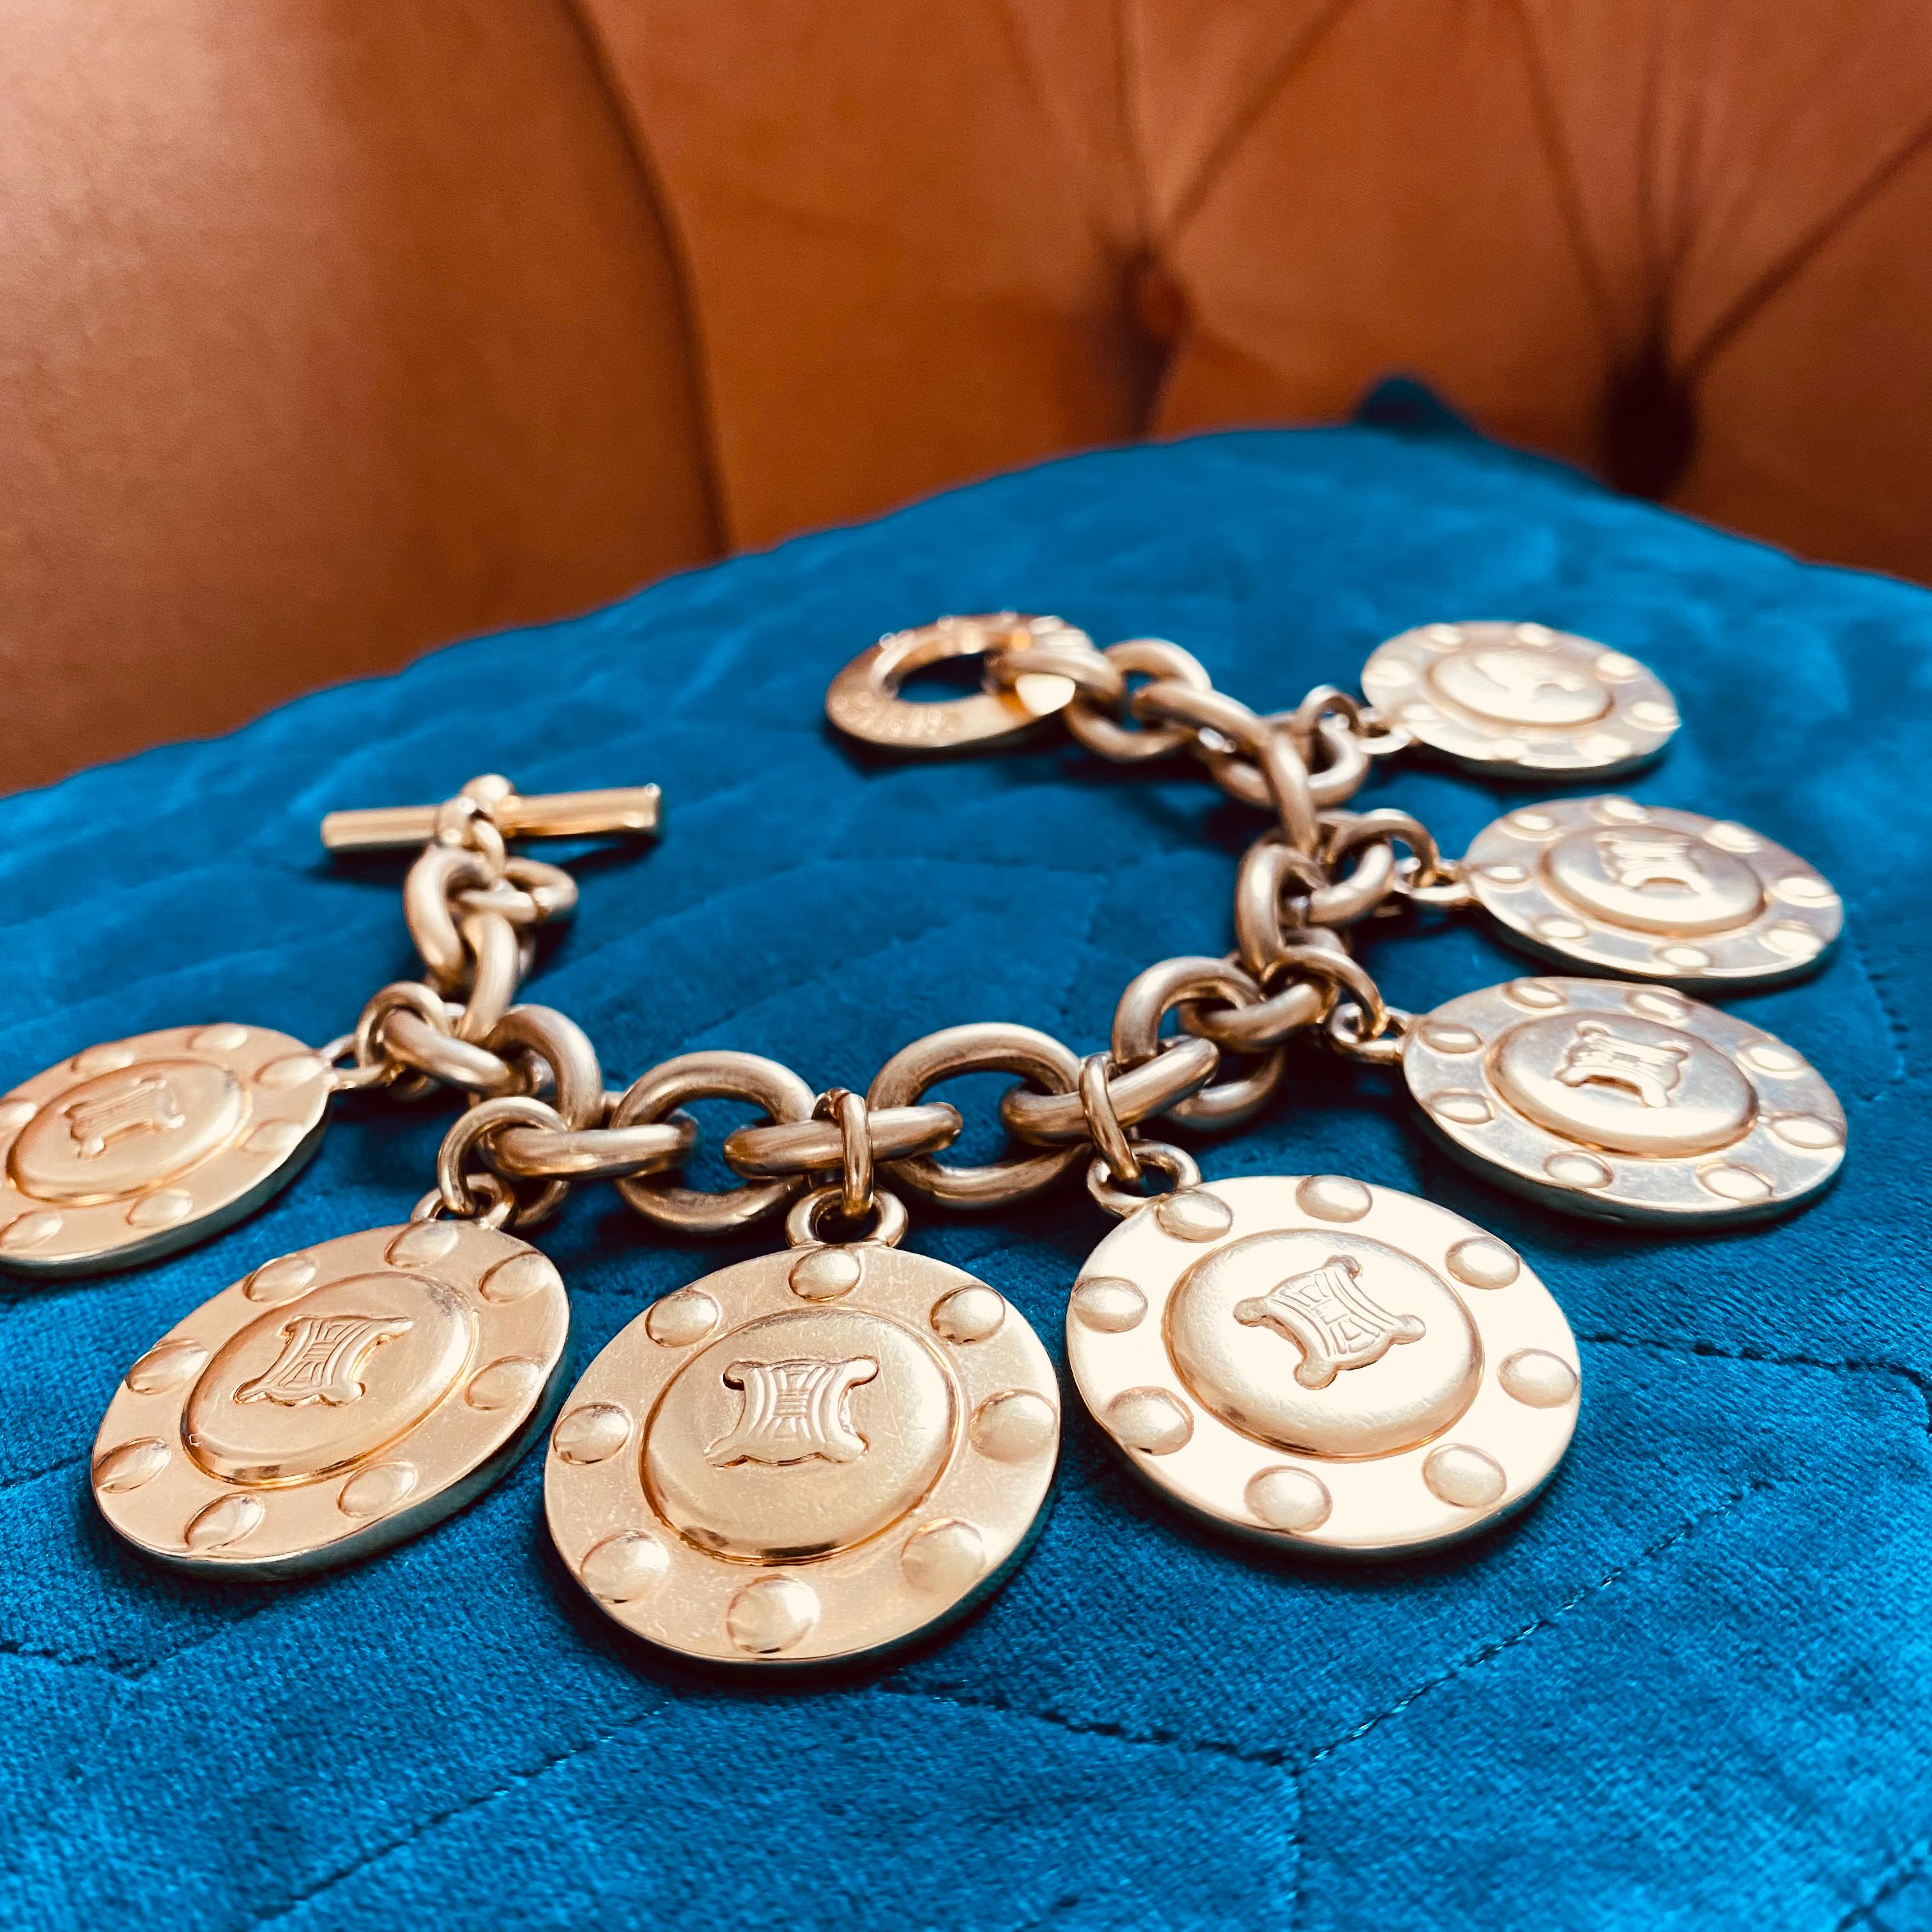 Celine Vintage 1980s Charm Bracelet
Incredible statement charm bracelet from the iconic house of Celine

Detail
-Made in Italy in the 1980s
-Crafted from high quality gold plated metal
-Large circular charms on a chunky chain bracelet with a toggle